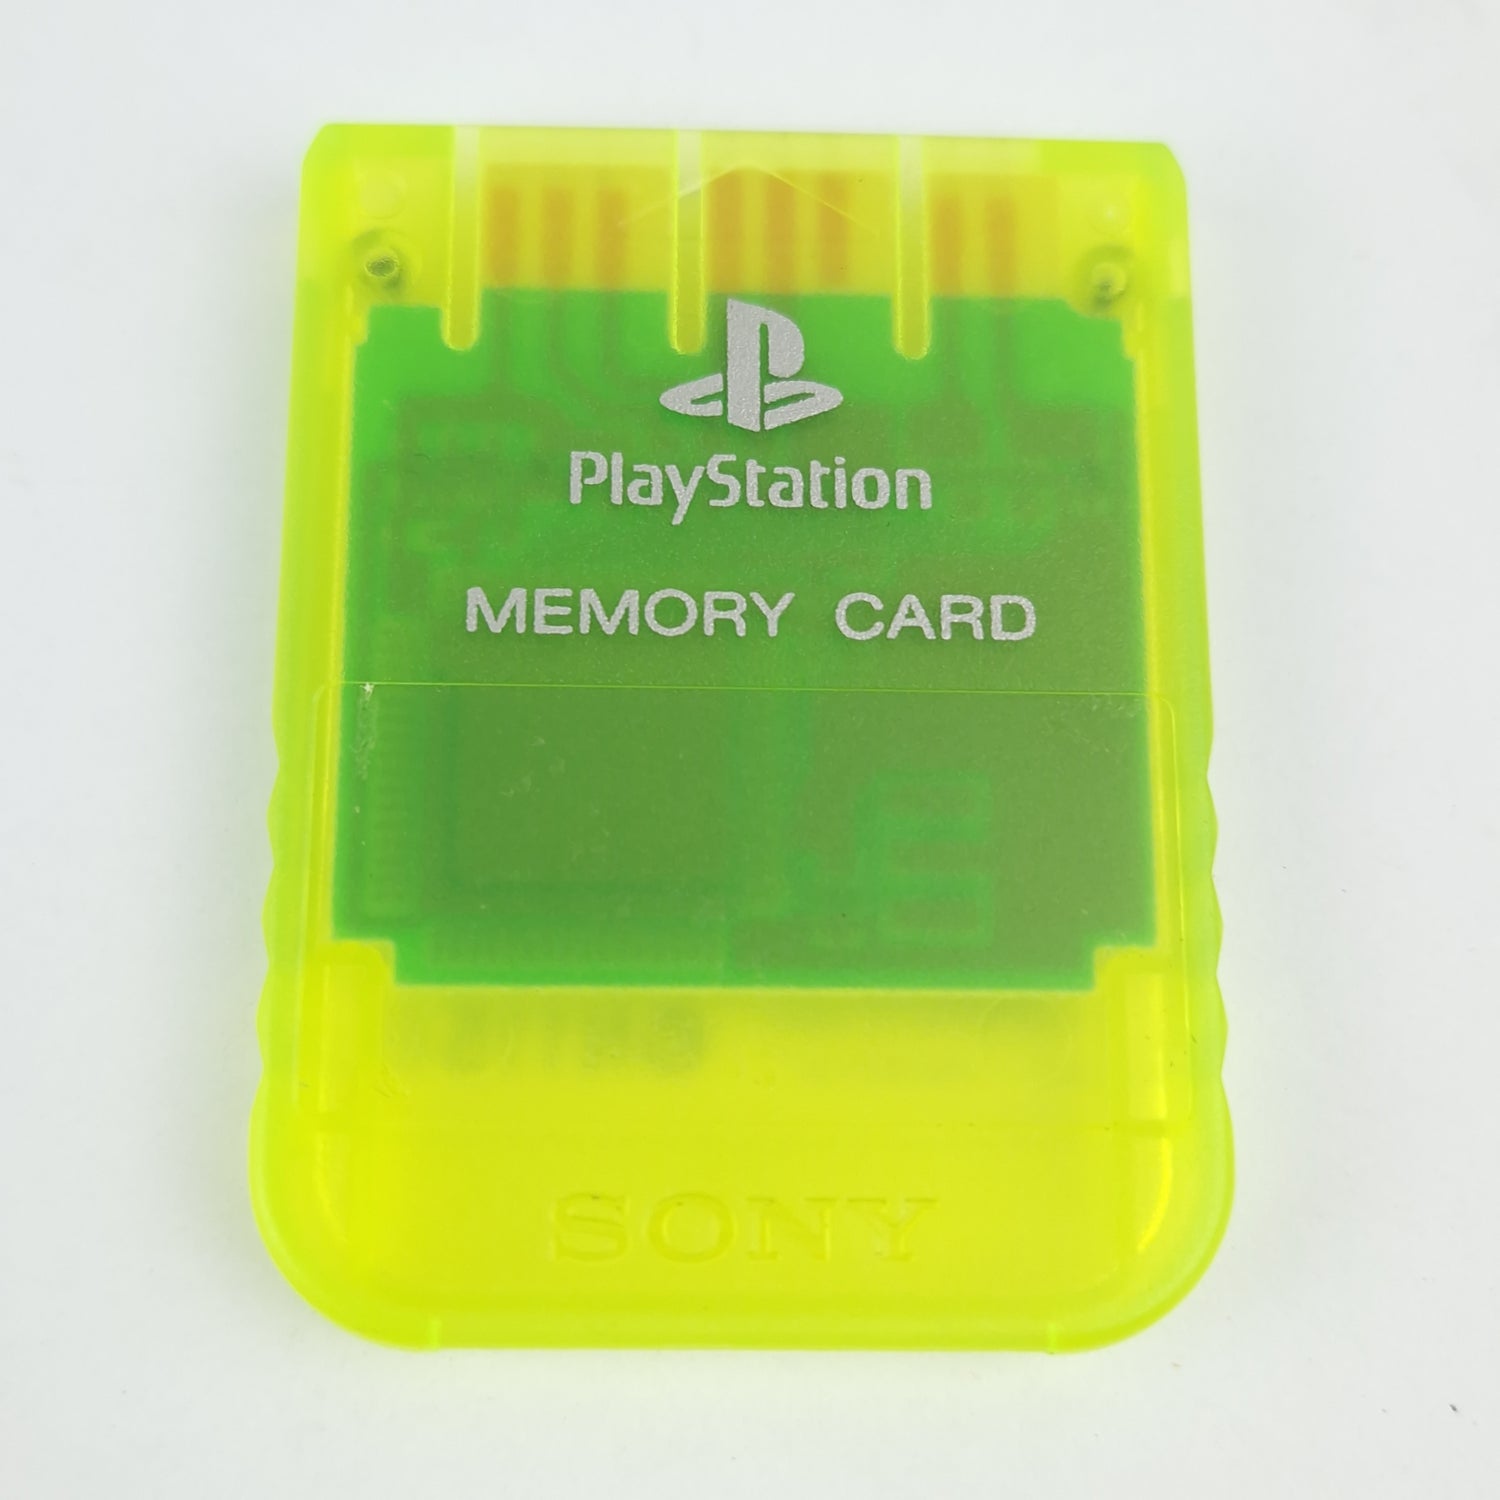 Playstation 1 Accessories: Memory Card / Memory Card - Color Yellow Transparent PS1